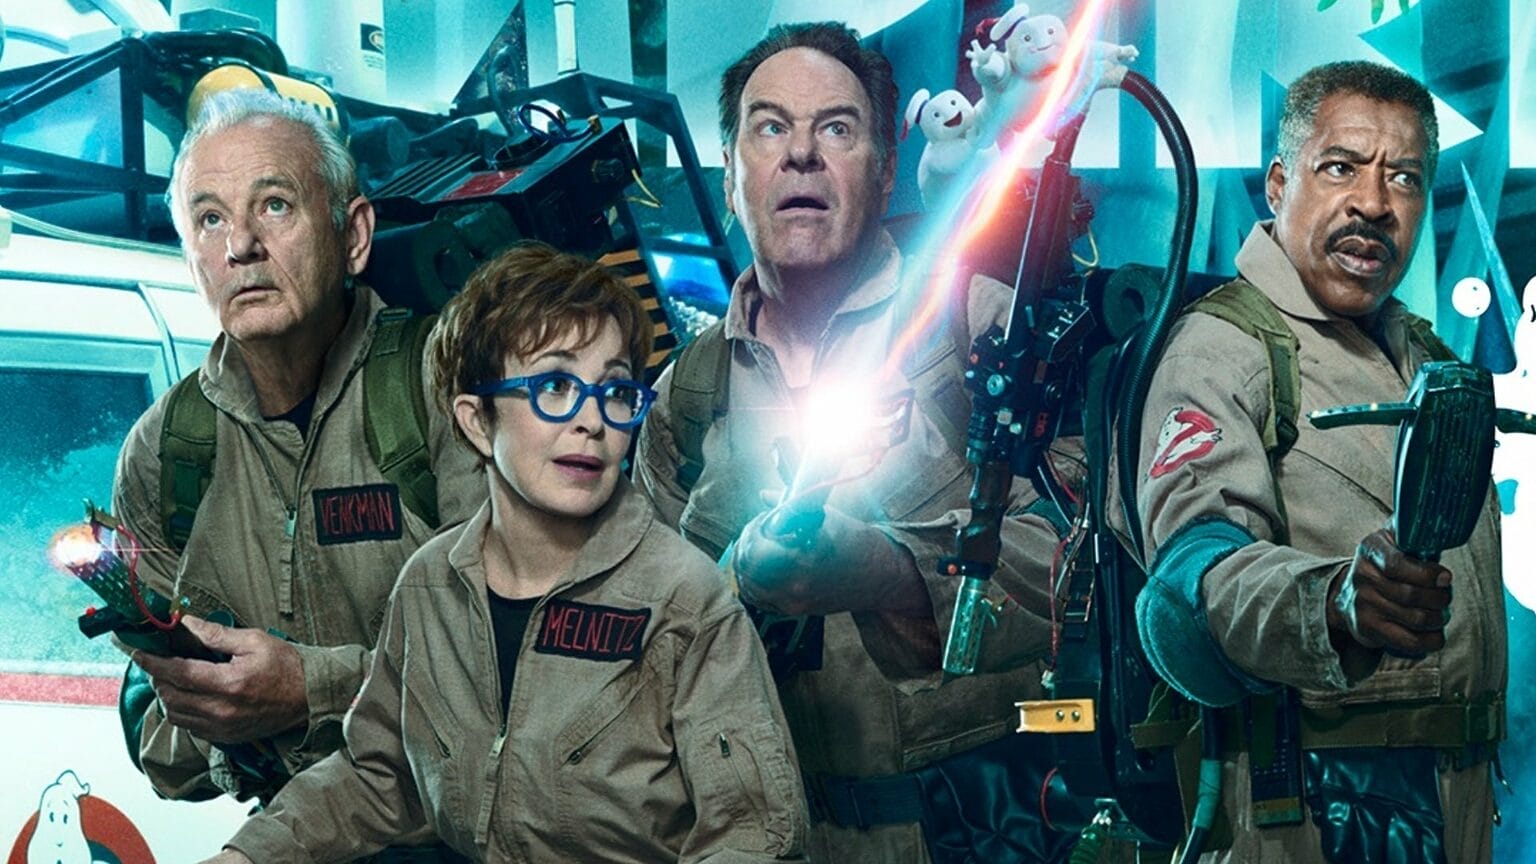 New posters and details for Ghostbusters Frozen Empire